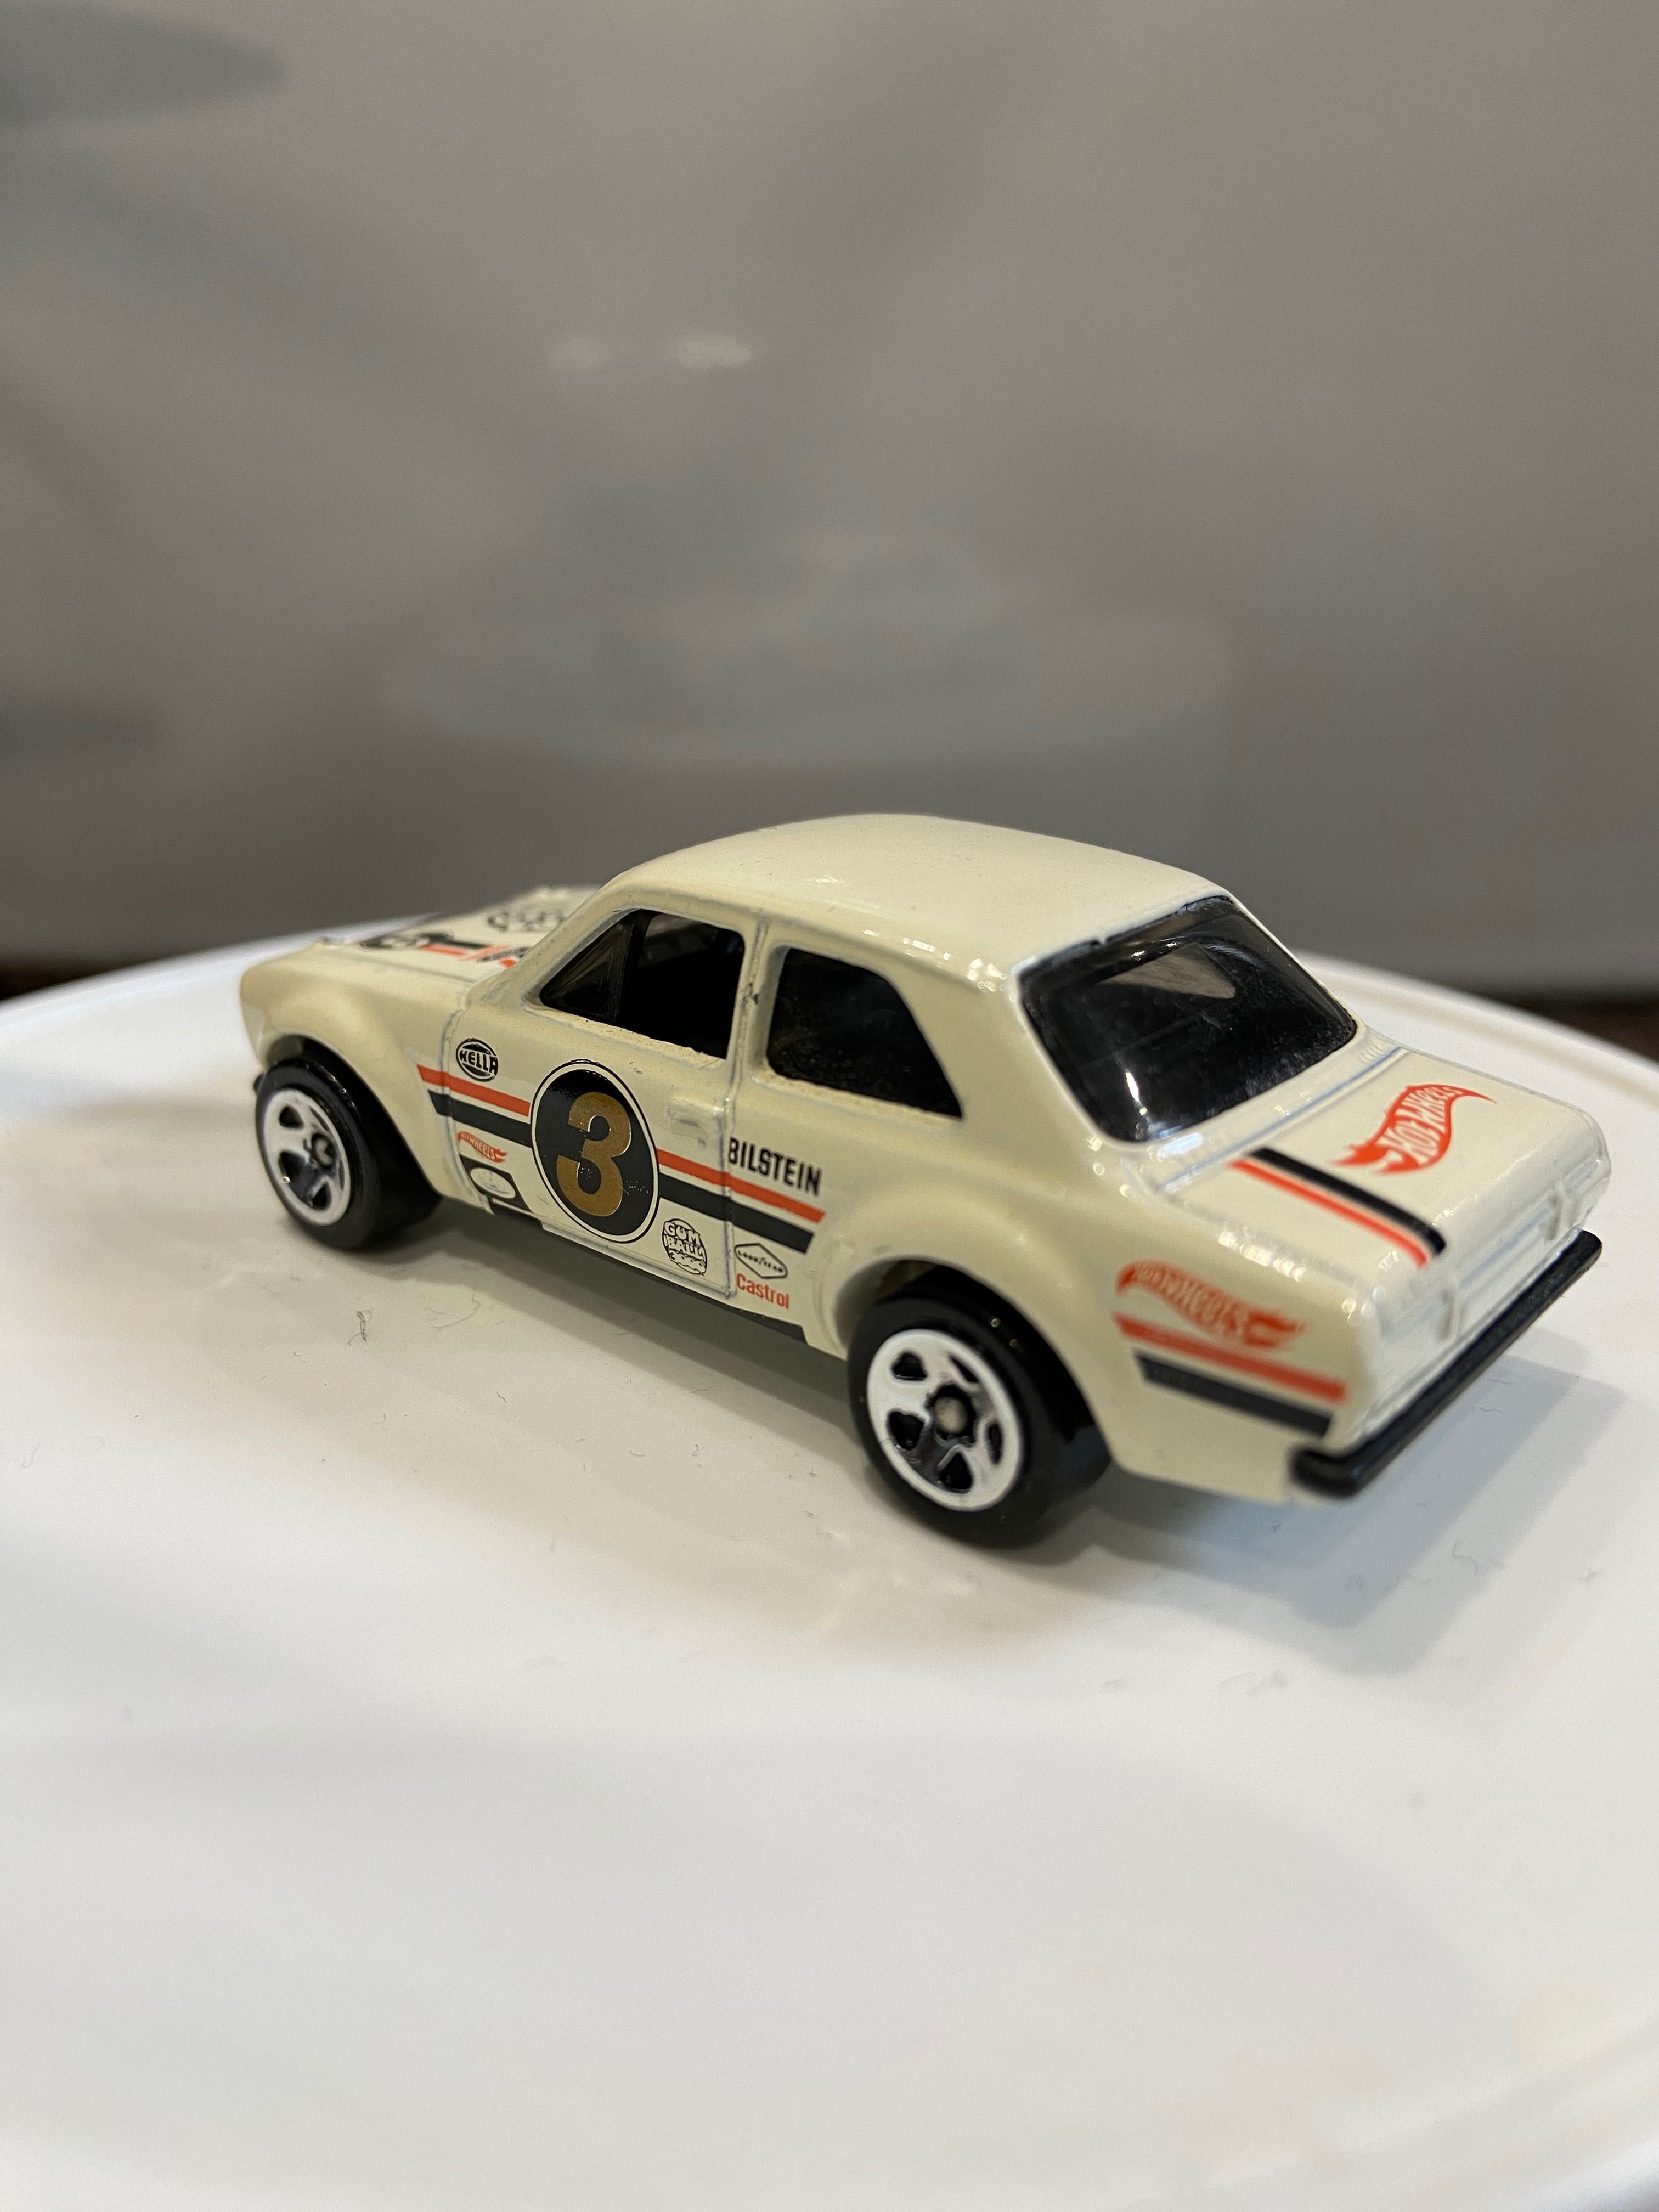 Hot wheels Ford escort rs 1600 gumball